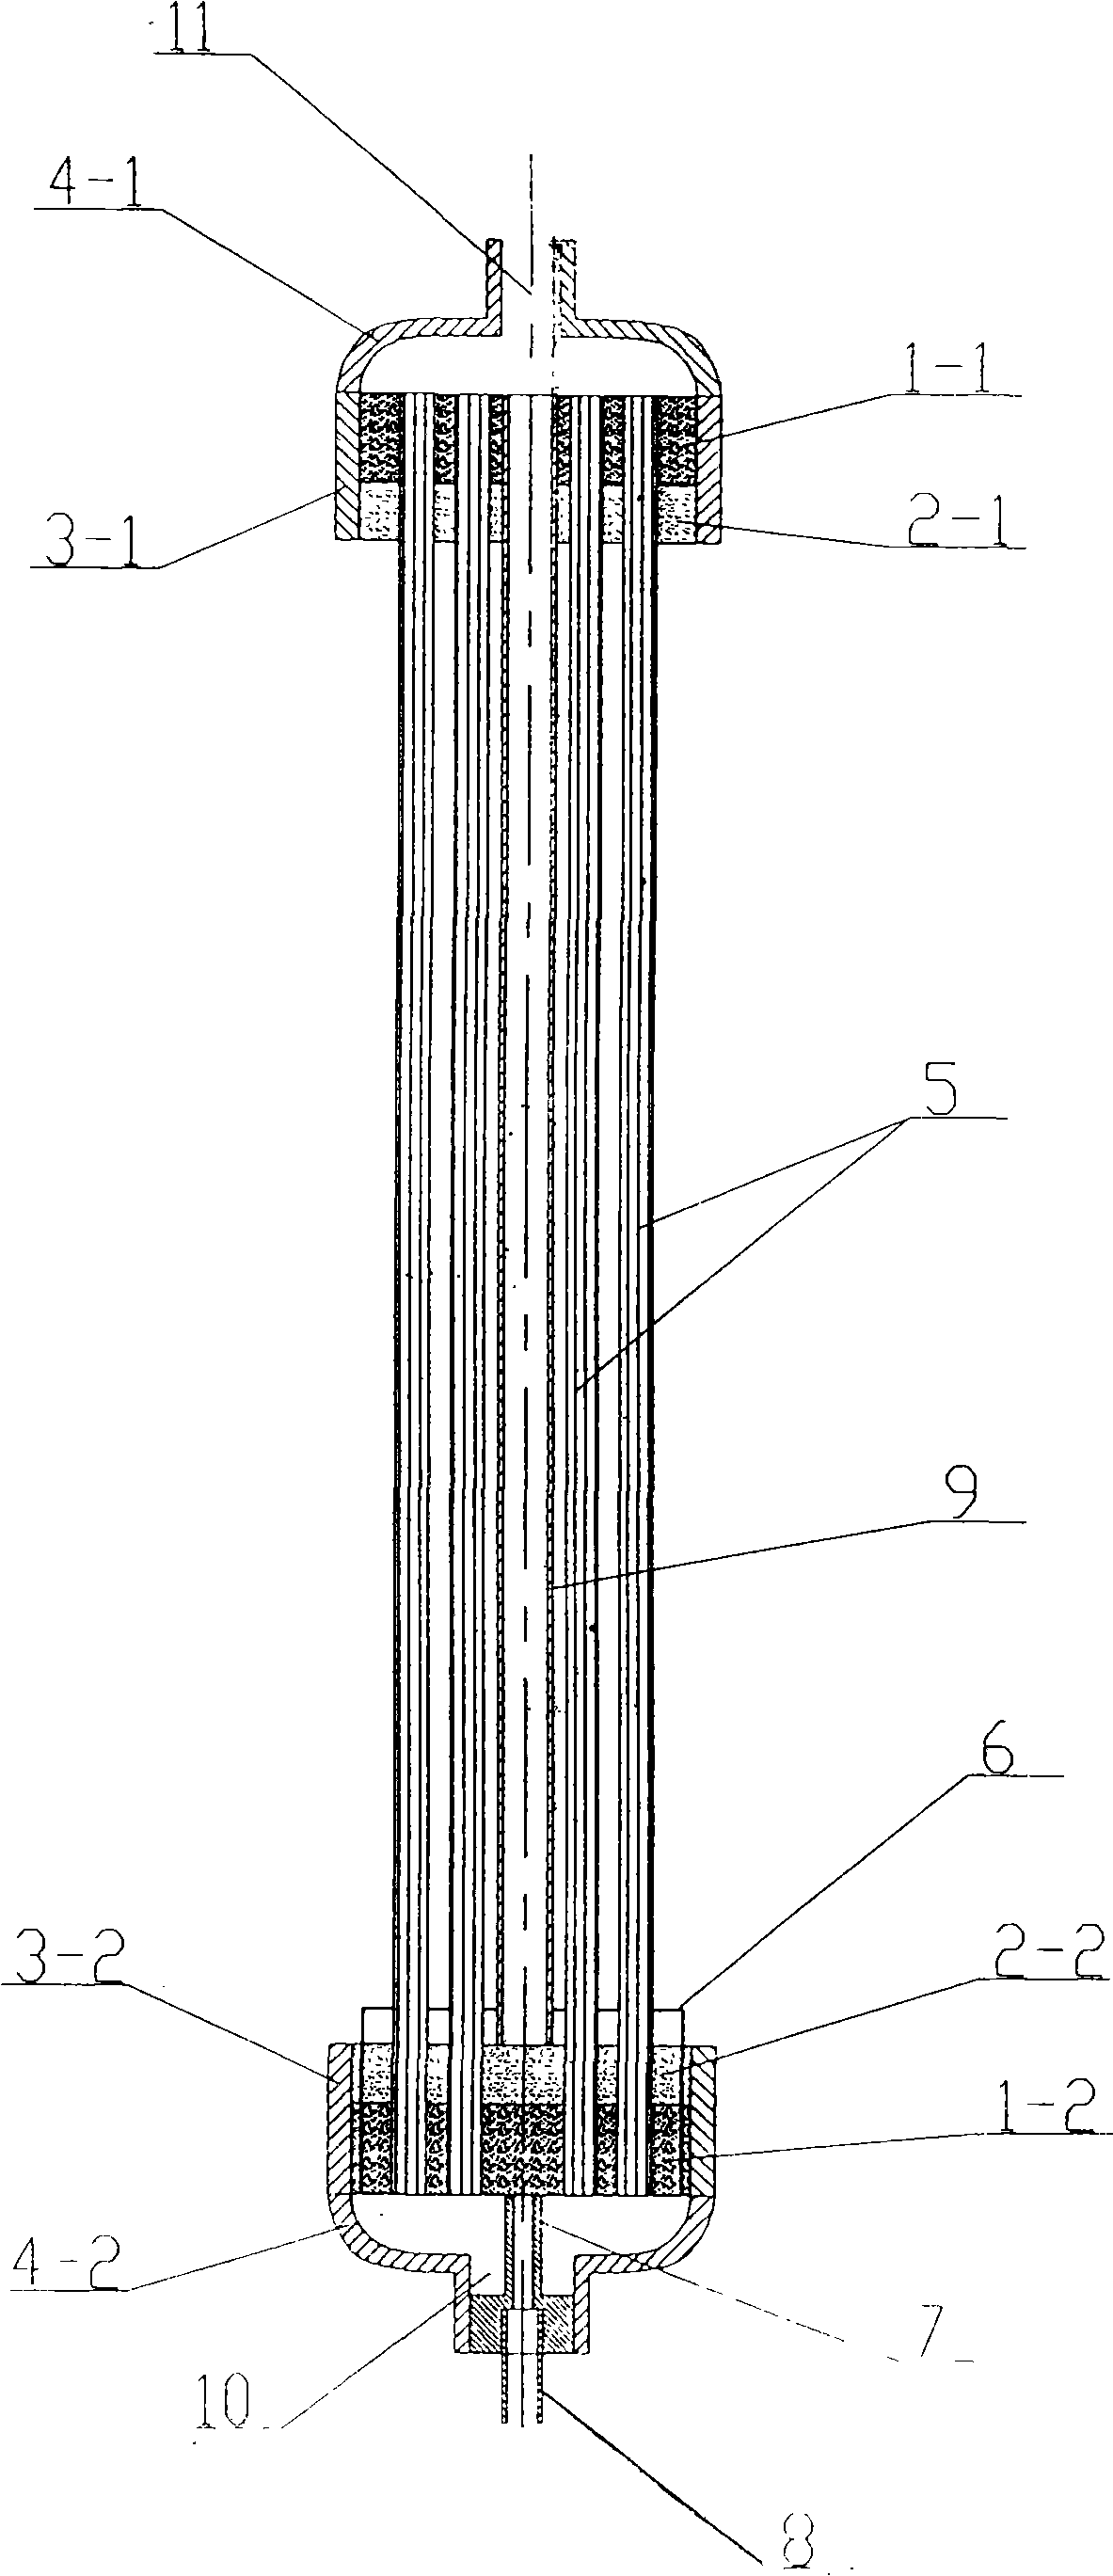 Both-end water-generating immersed hollow fiber film component